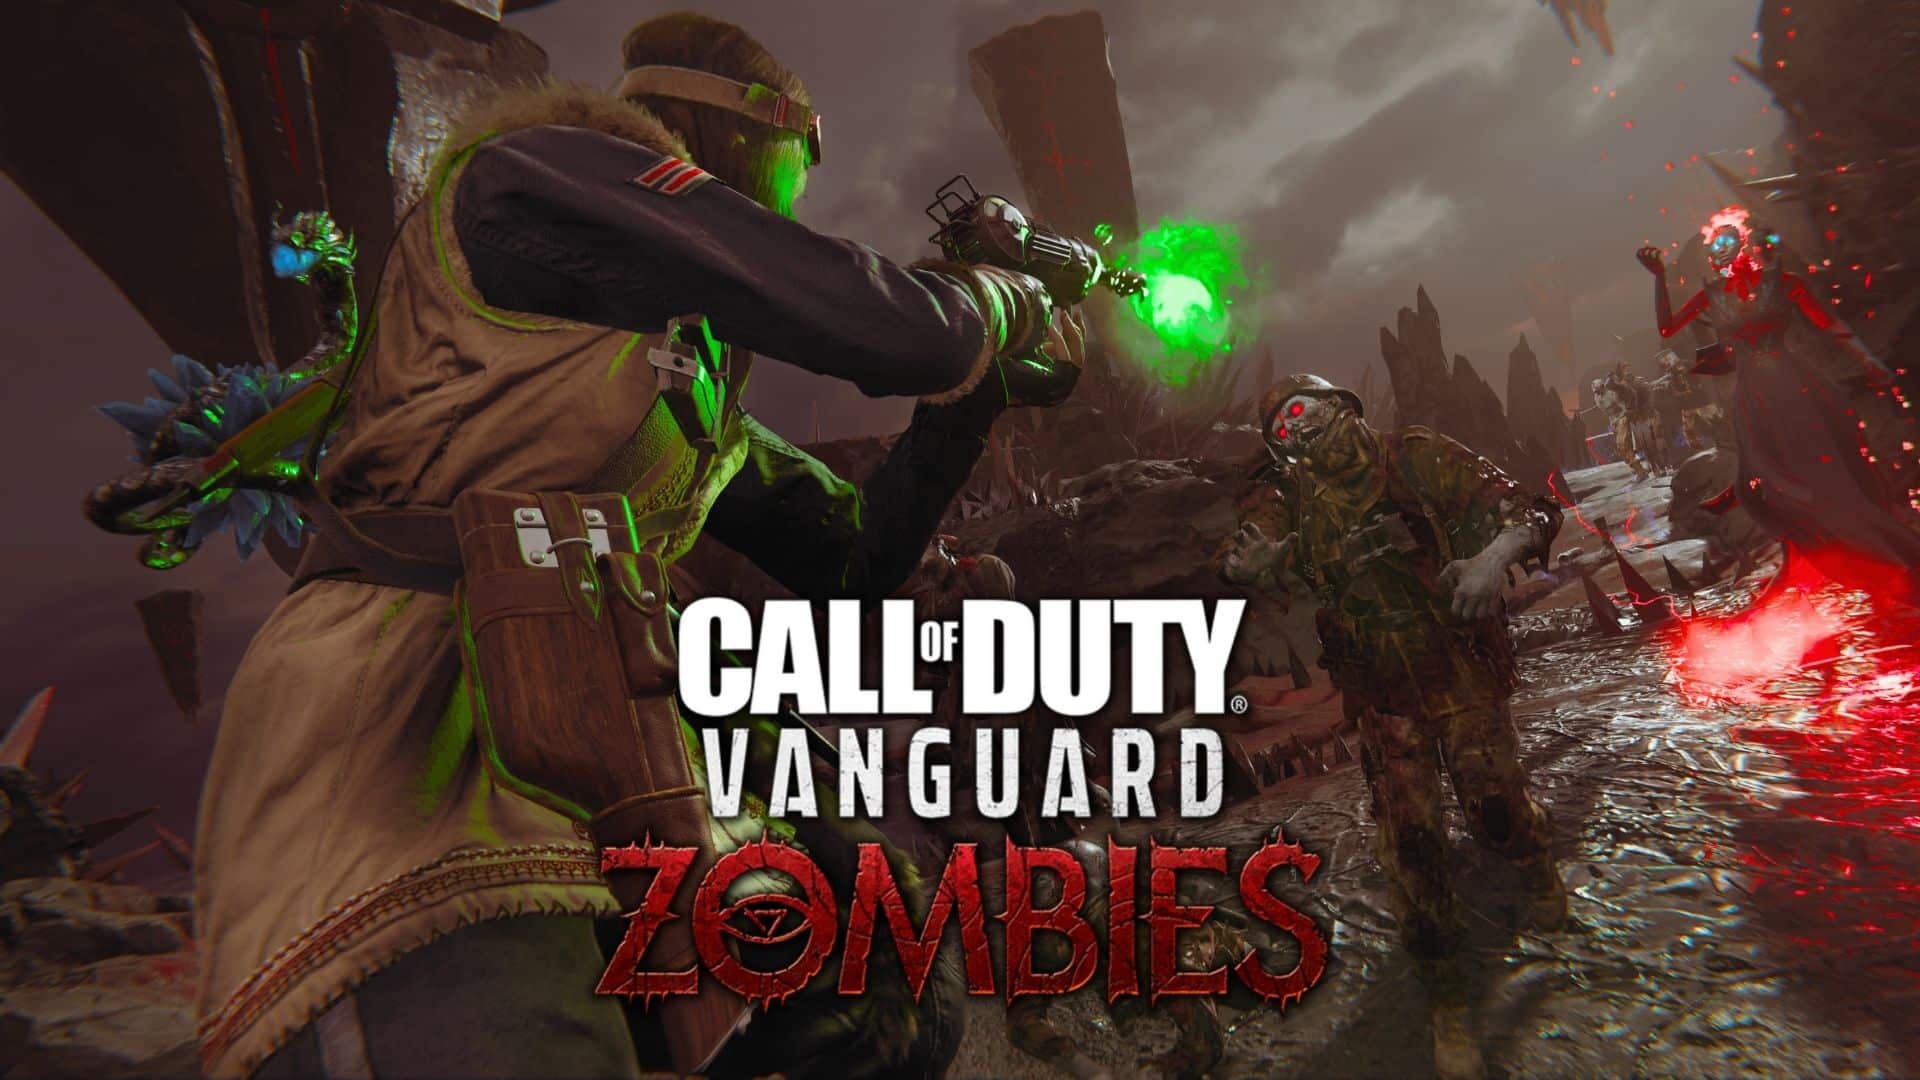 Call of Duty: Vanguard shows off its Zombies